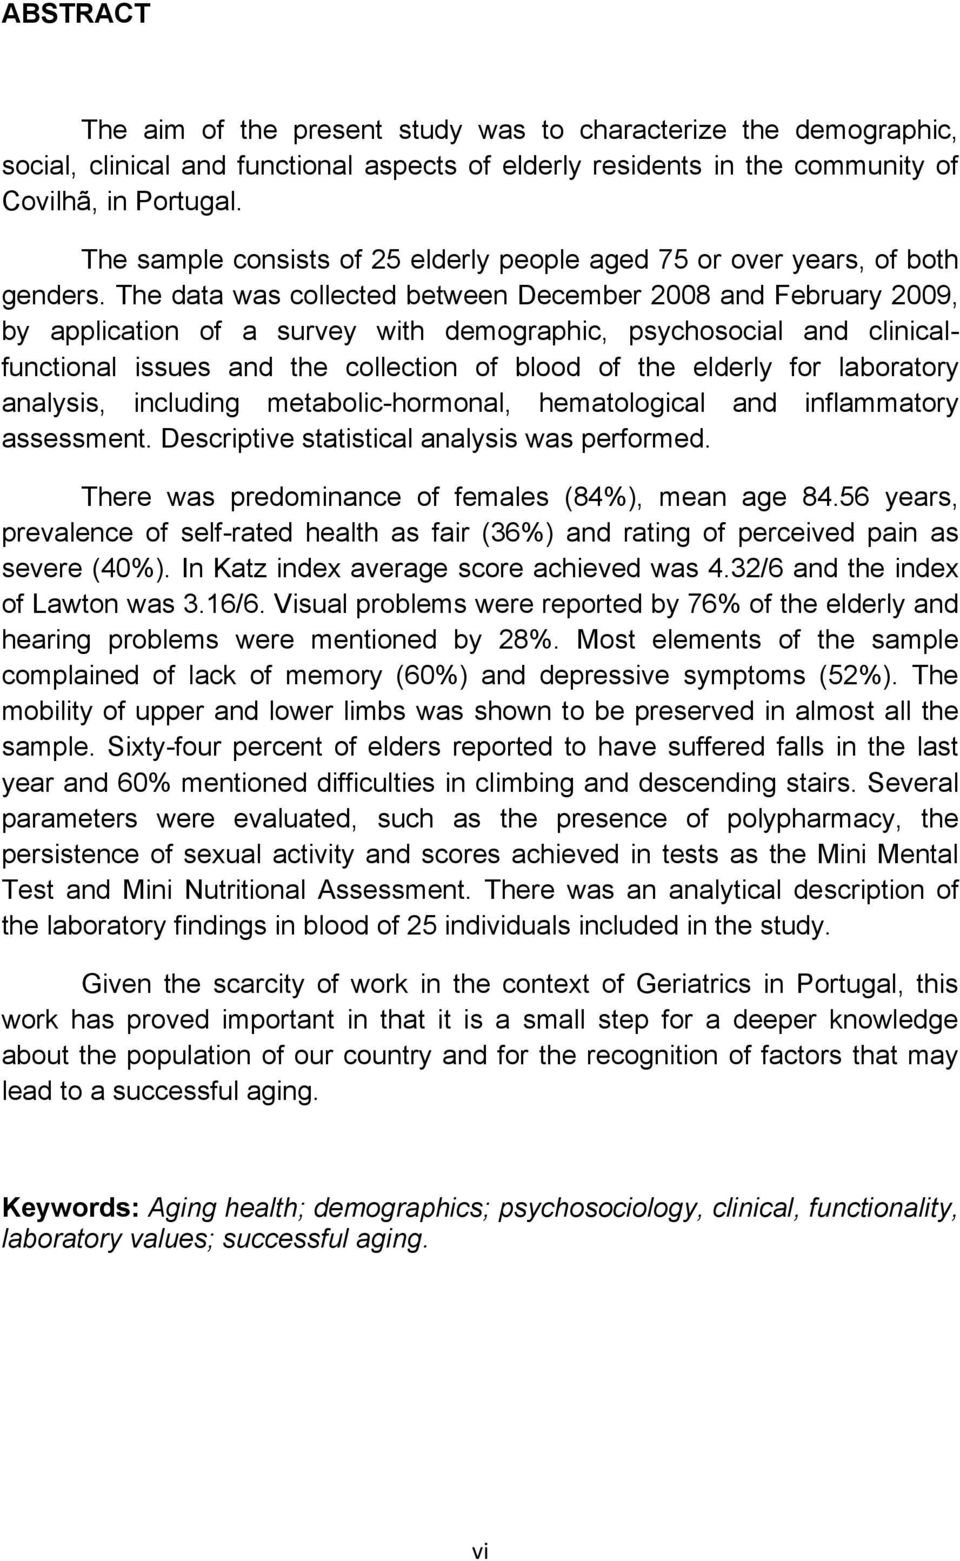 The data was collected between December 2008 and February 2009, by application of a survey with demographic, psychosocial and clinicalfunctional issues and the collection of blood of the elderly for